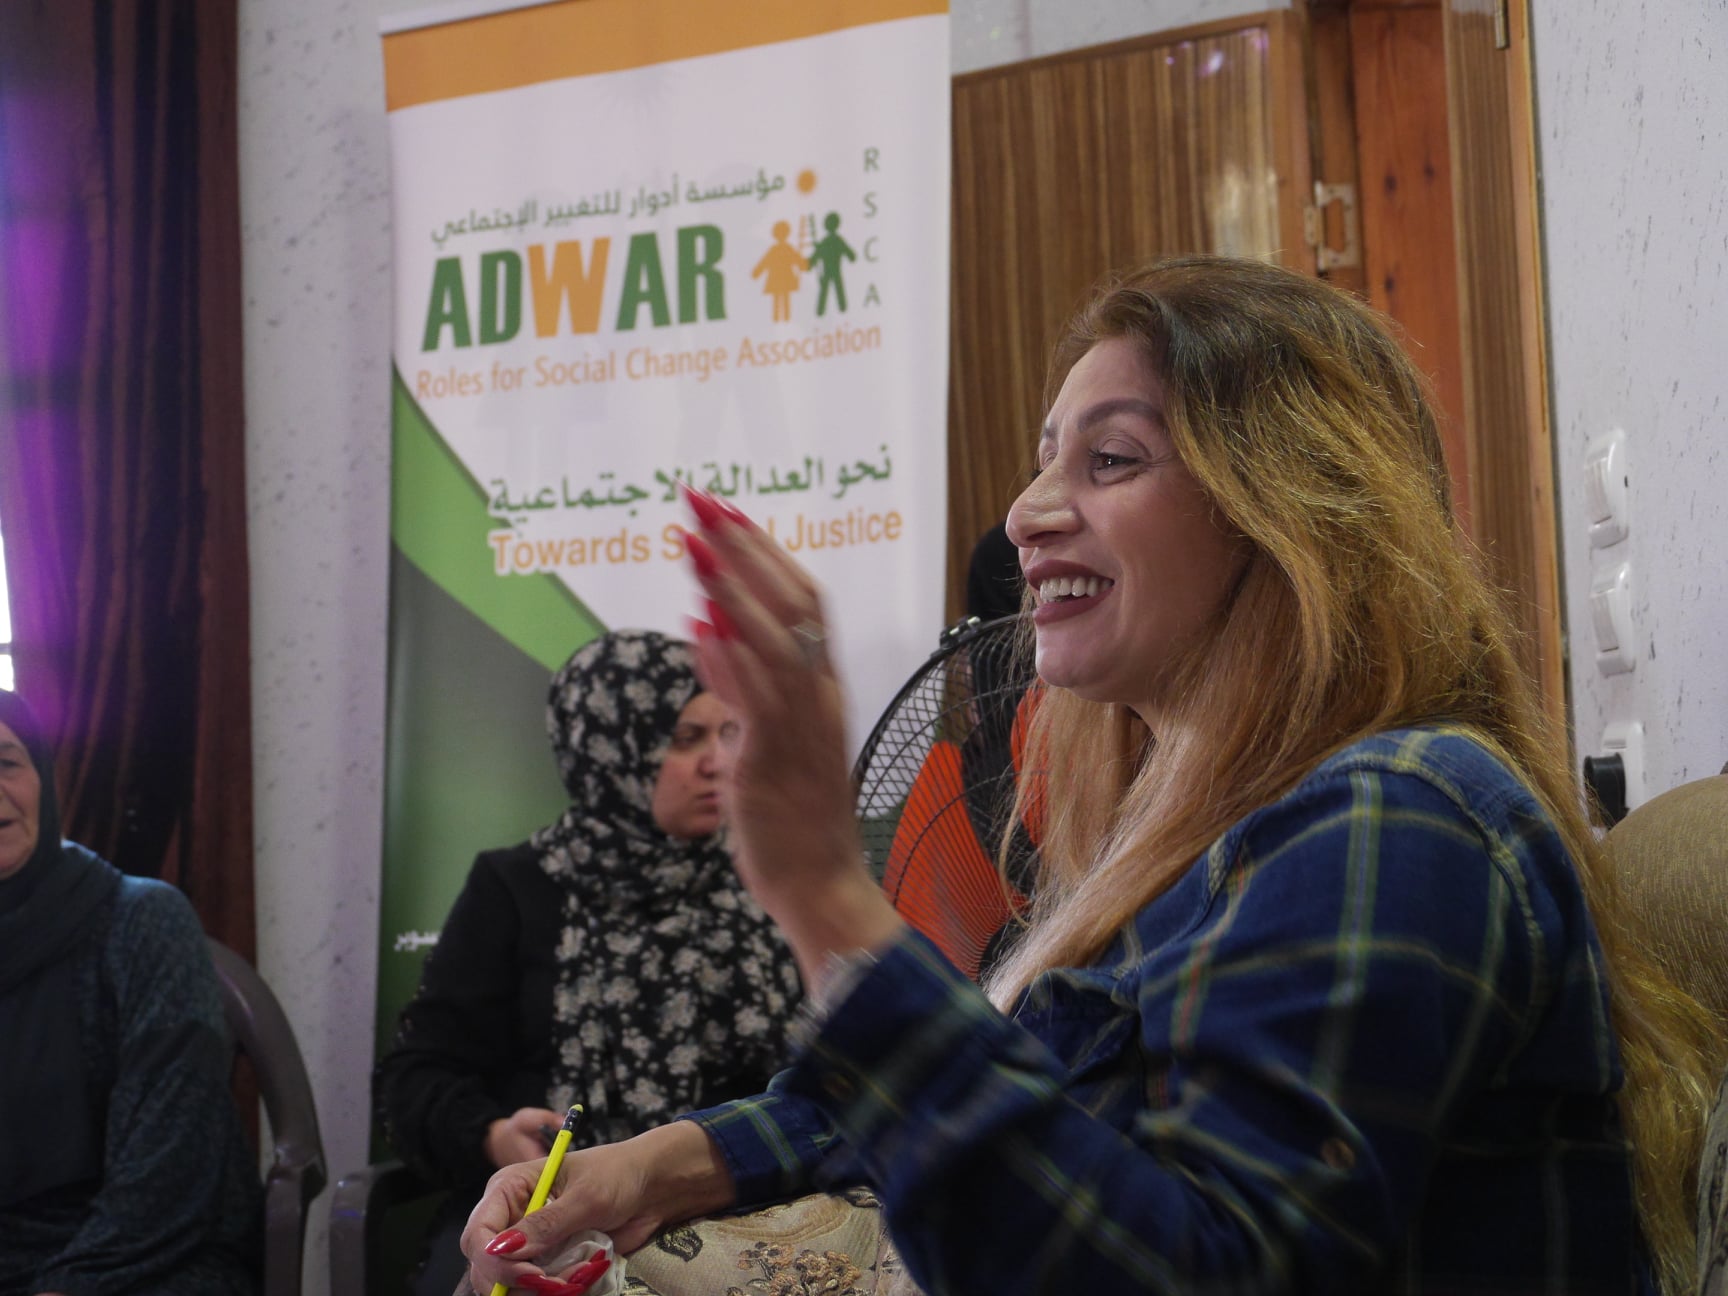  ADWAR meets with the women of Al-Baqa’a, east of Hebron, to determine their needs